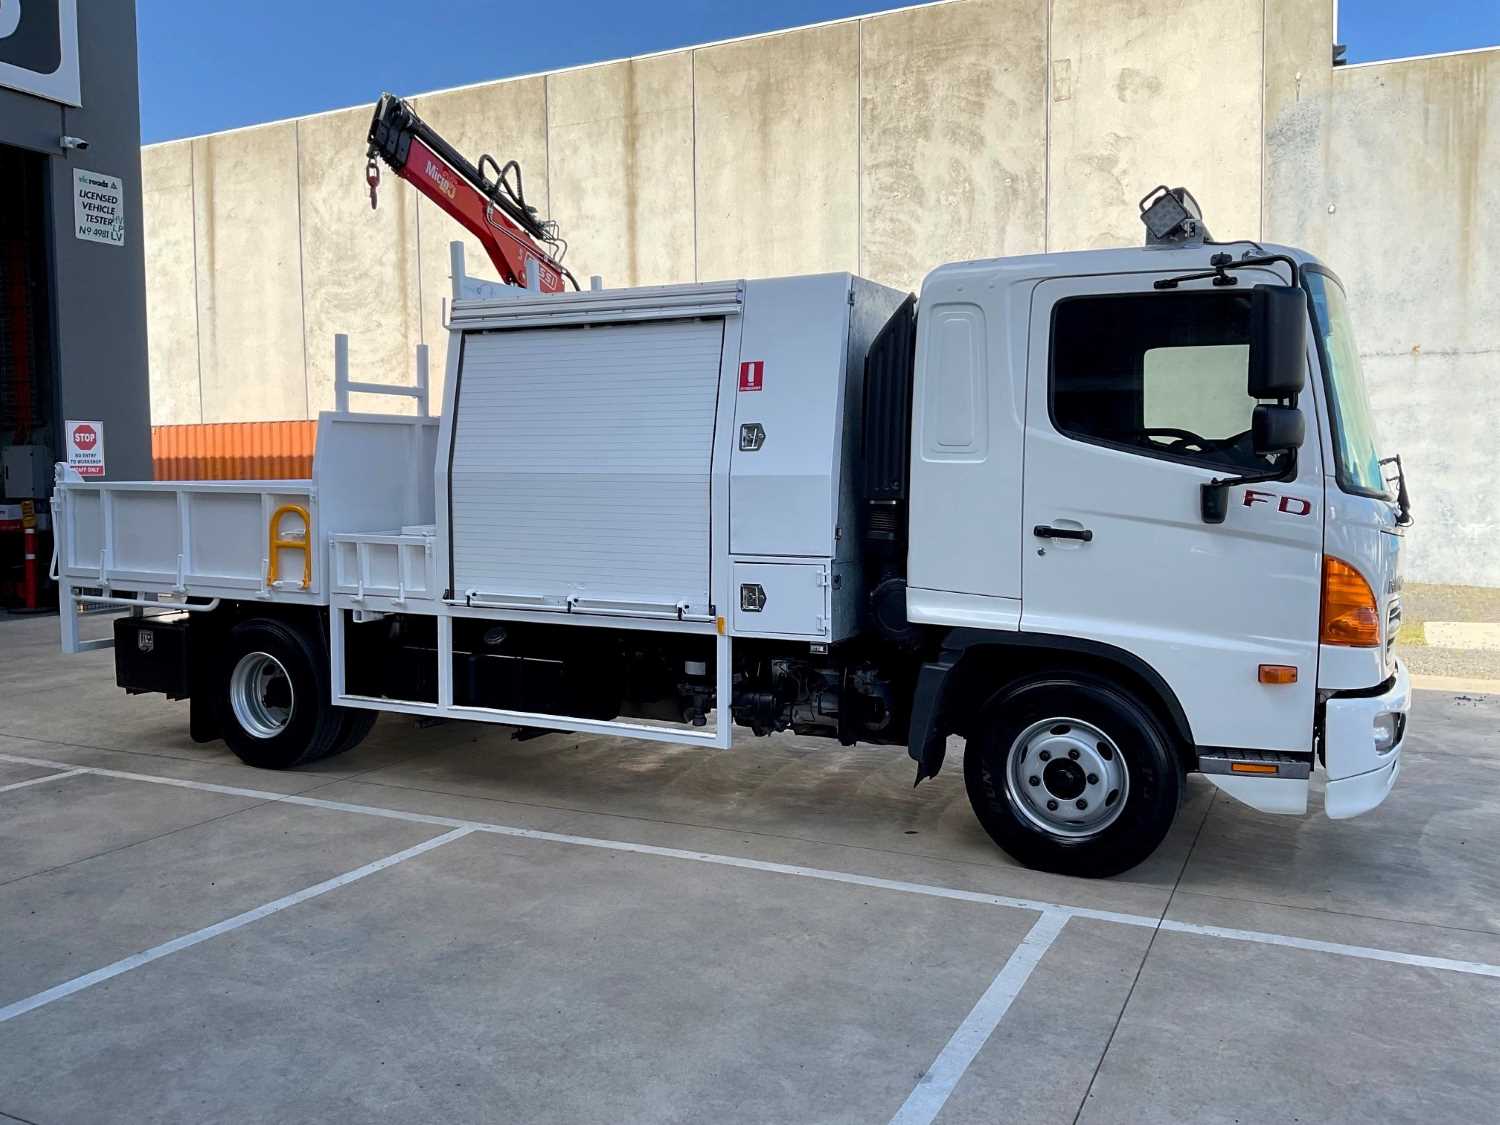 2010 HINO FD SERVICE BODY WITH TIPPER